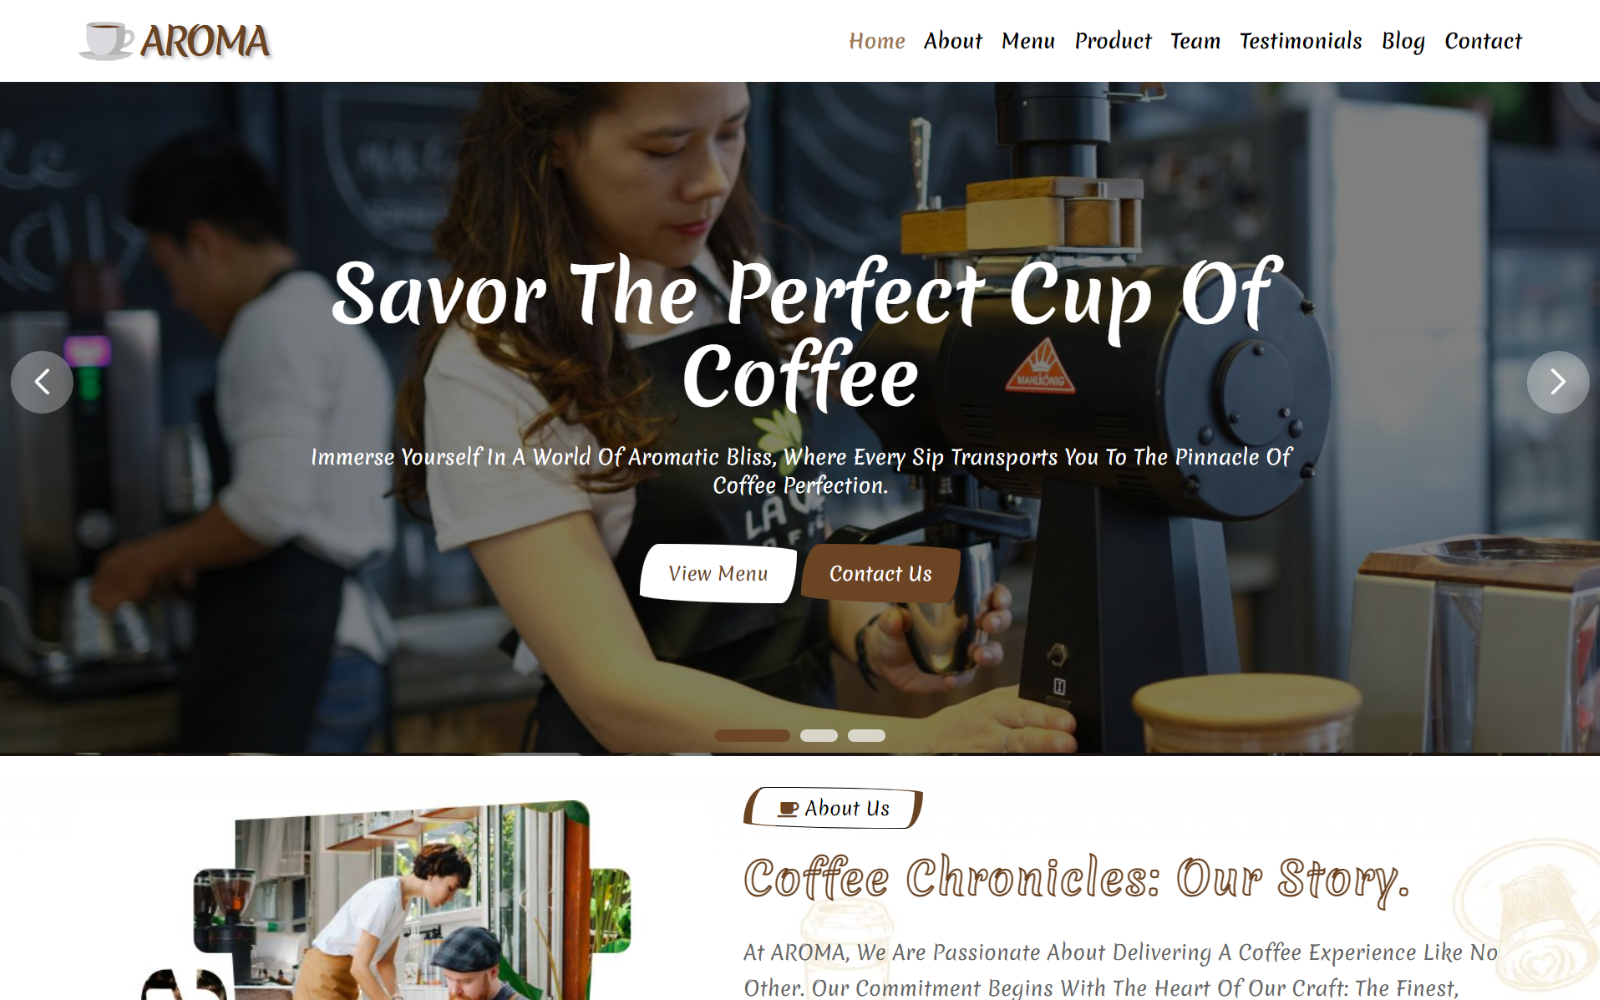 Aroma - Coffee Shop HTML5 Landing Page Template